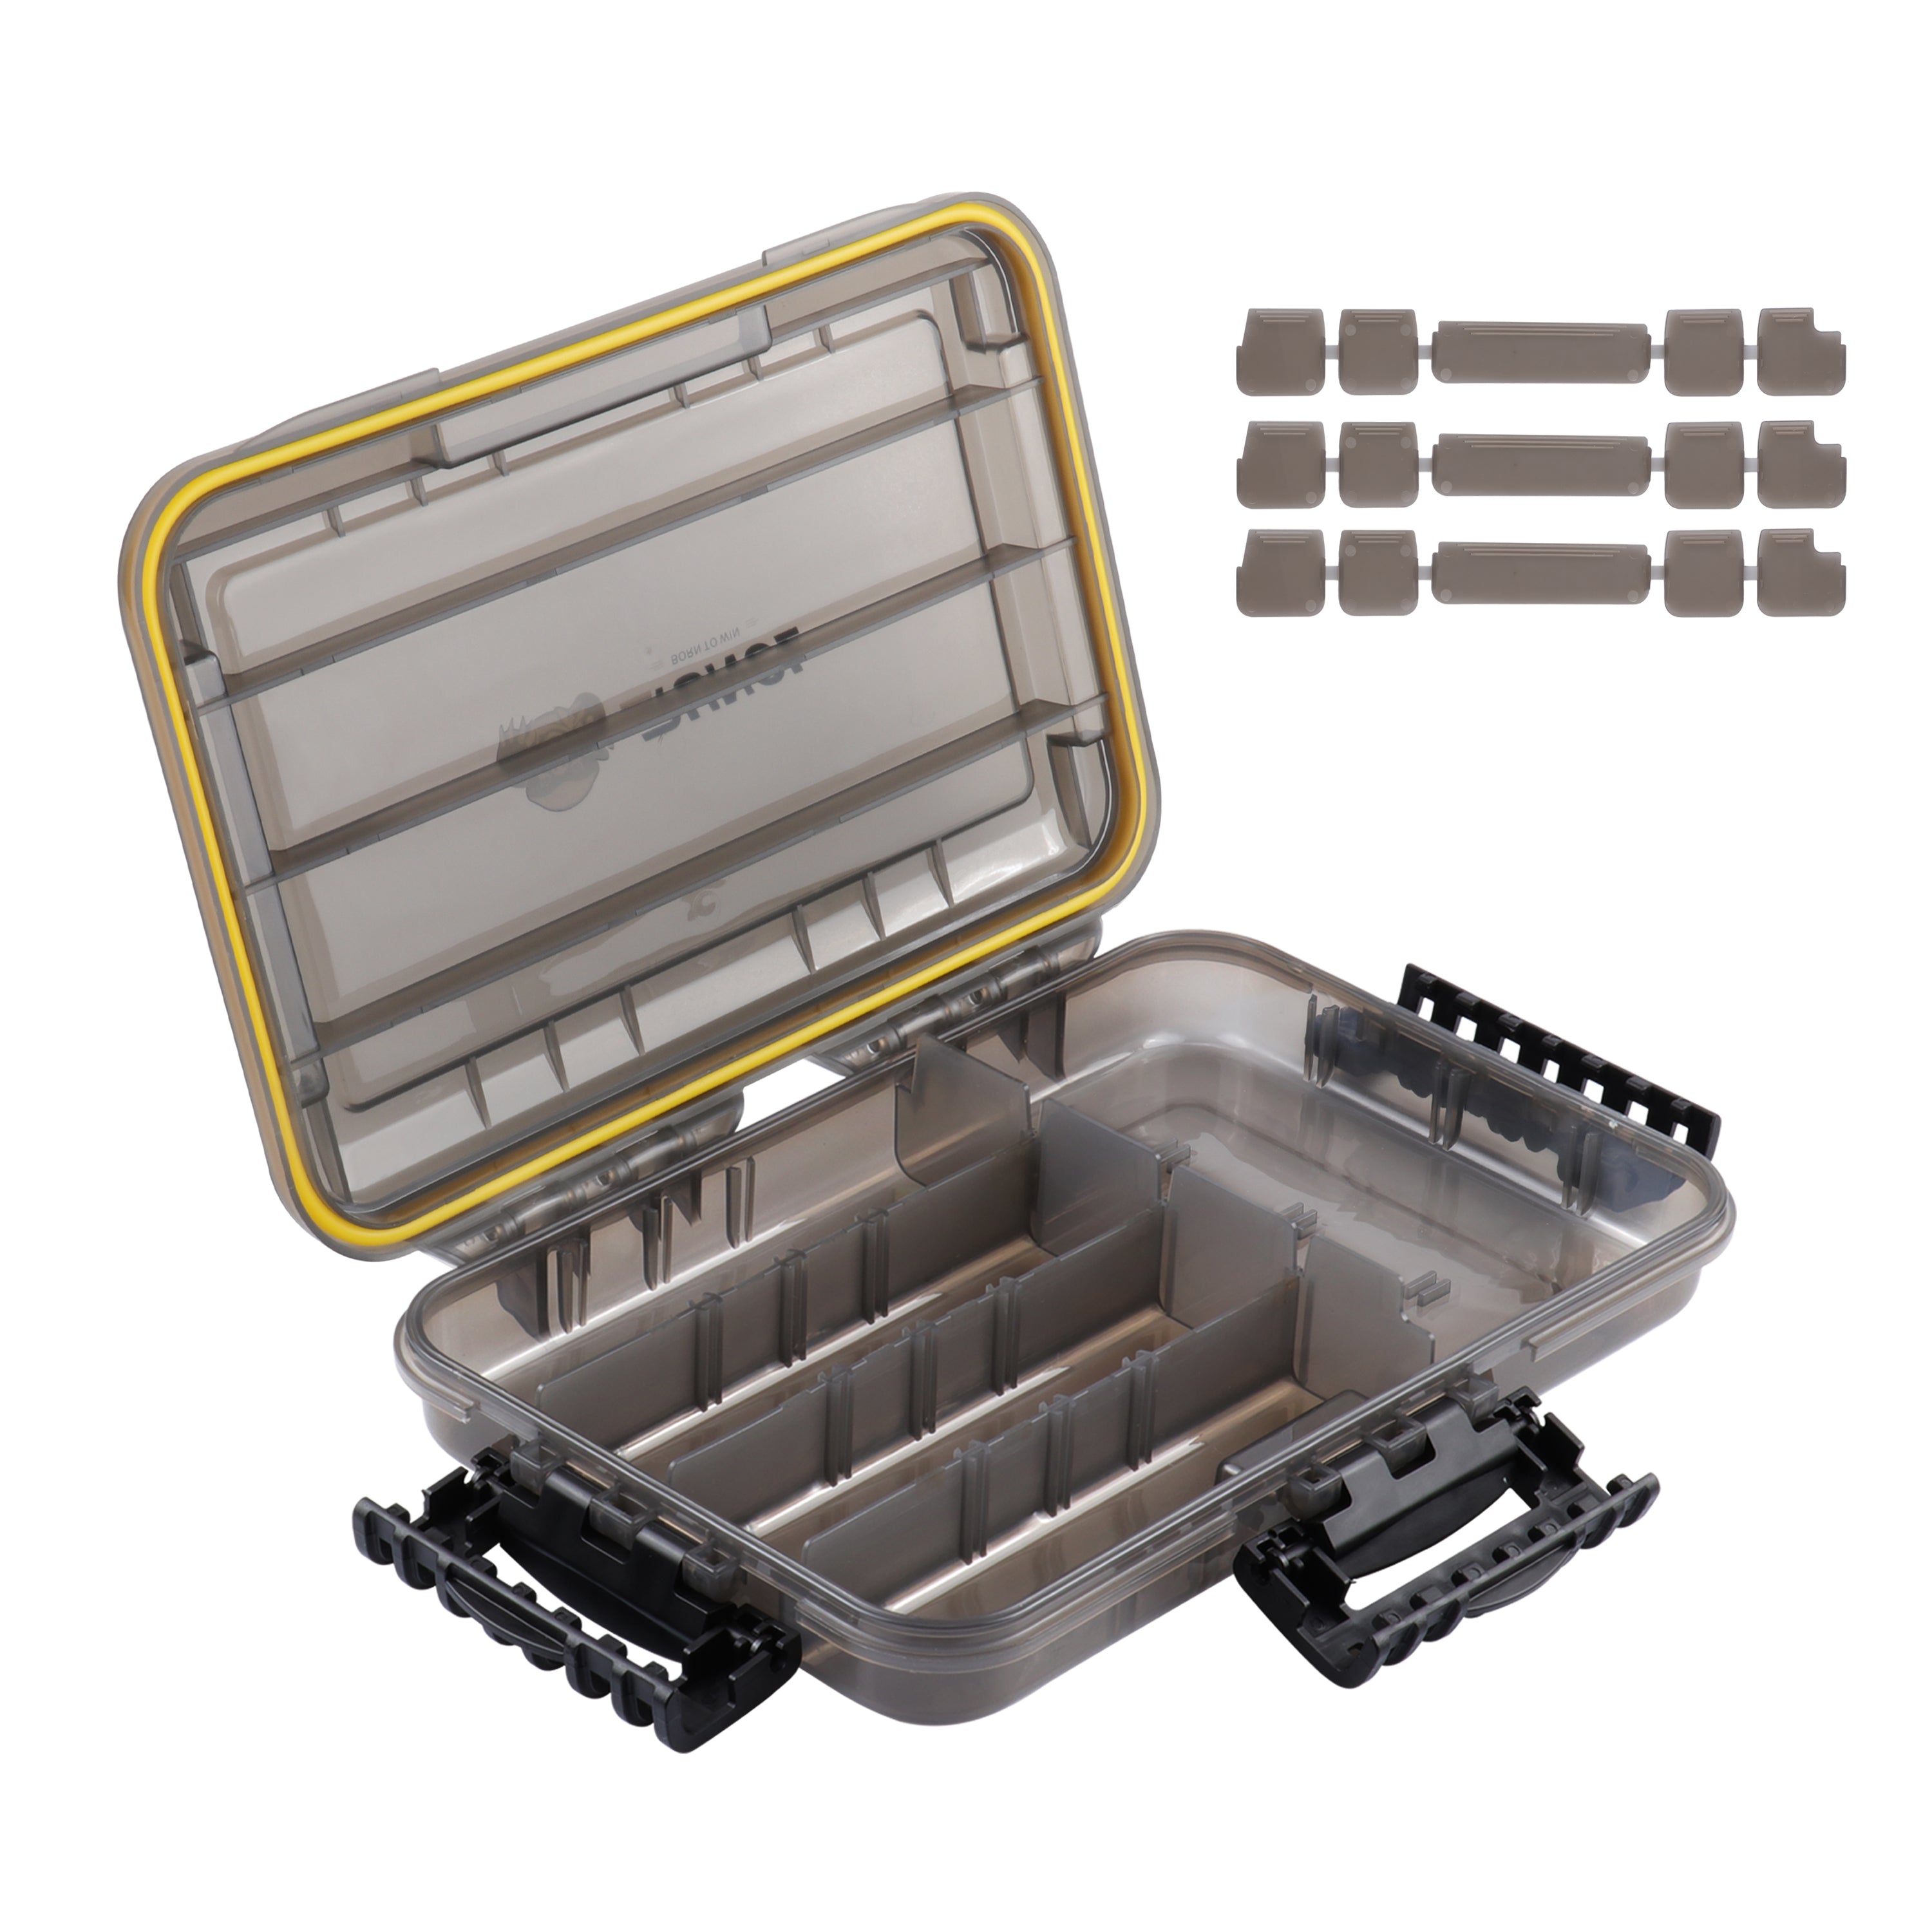 Small Tackle Box Organizer Fishing Tackle Box With 15 Removable